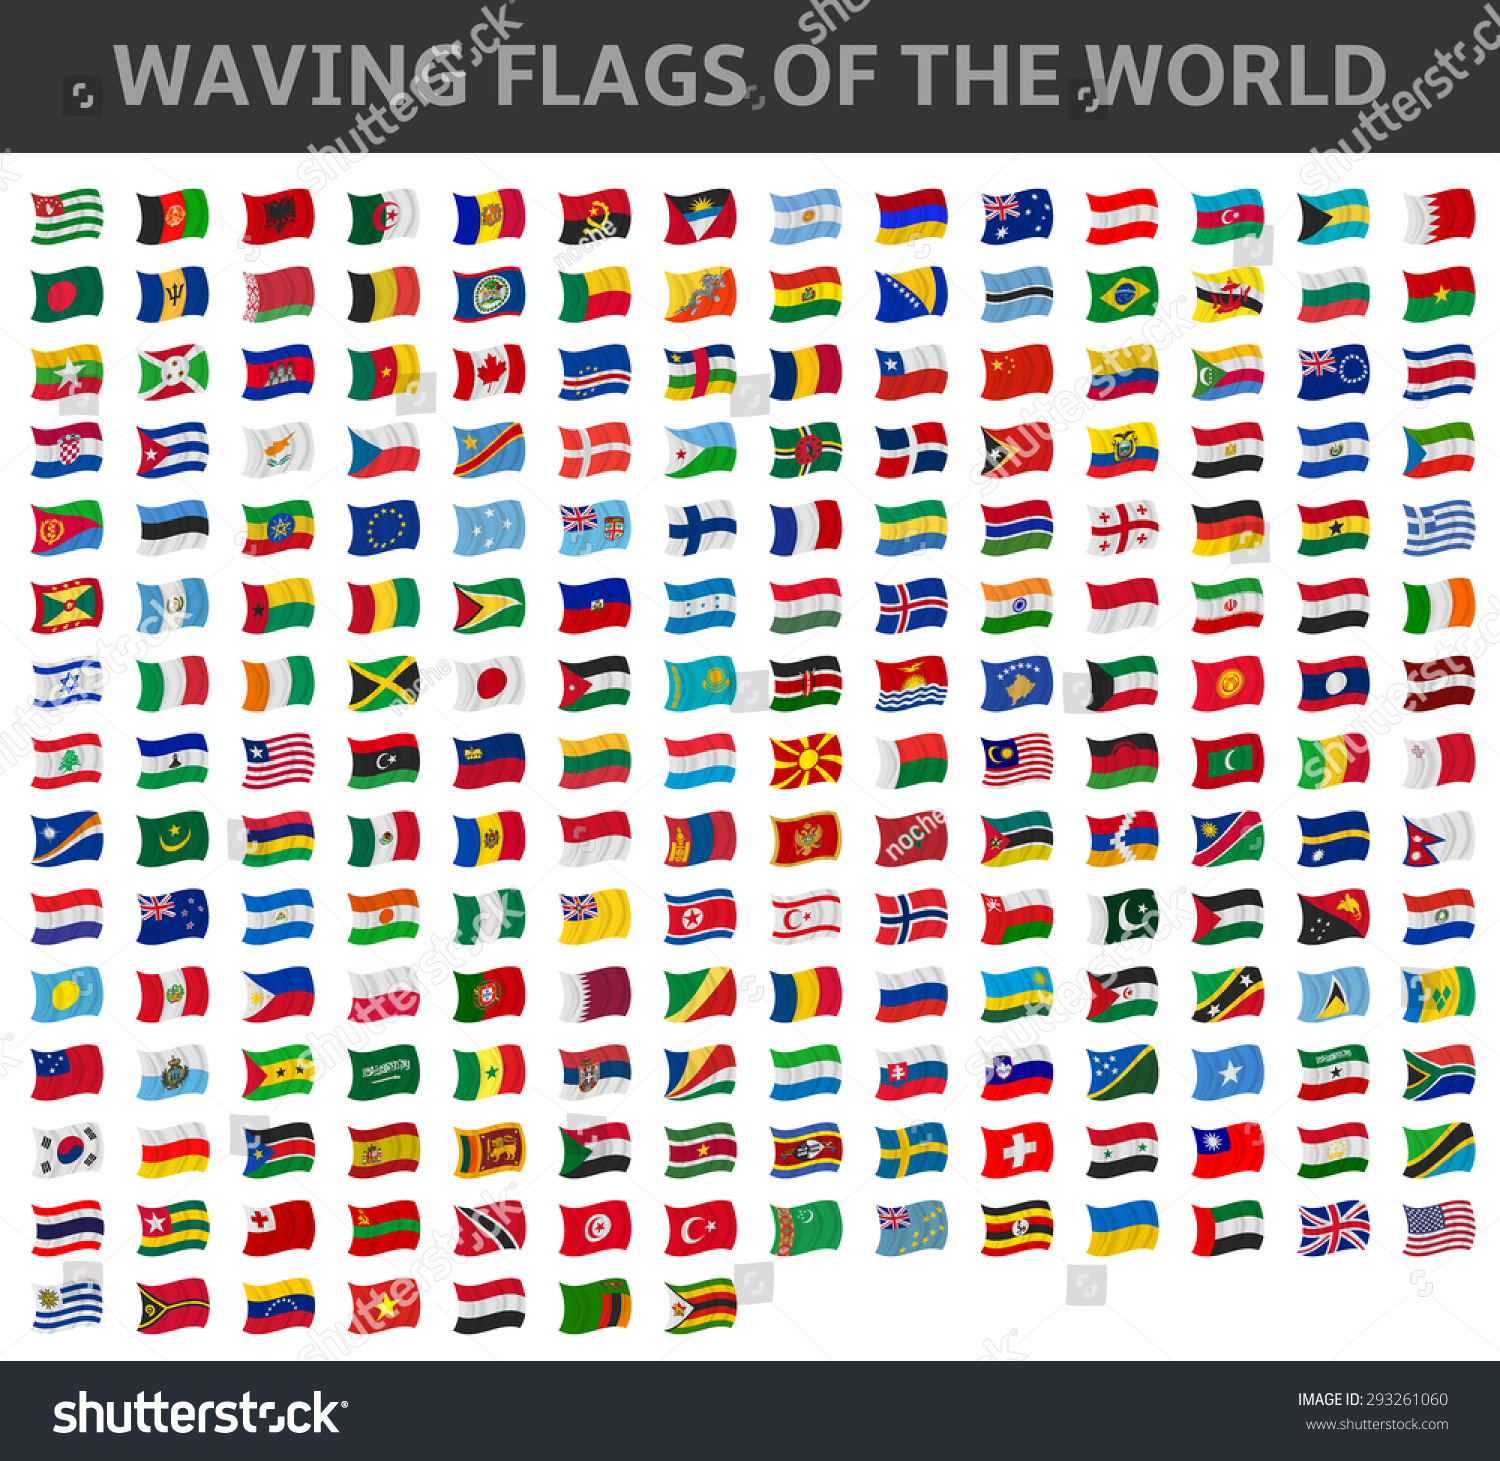 waving flags of the world #293261060